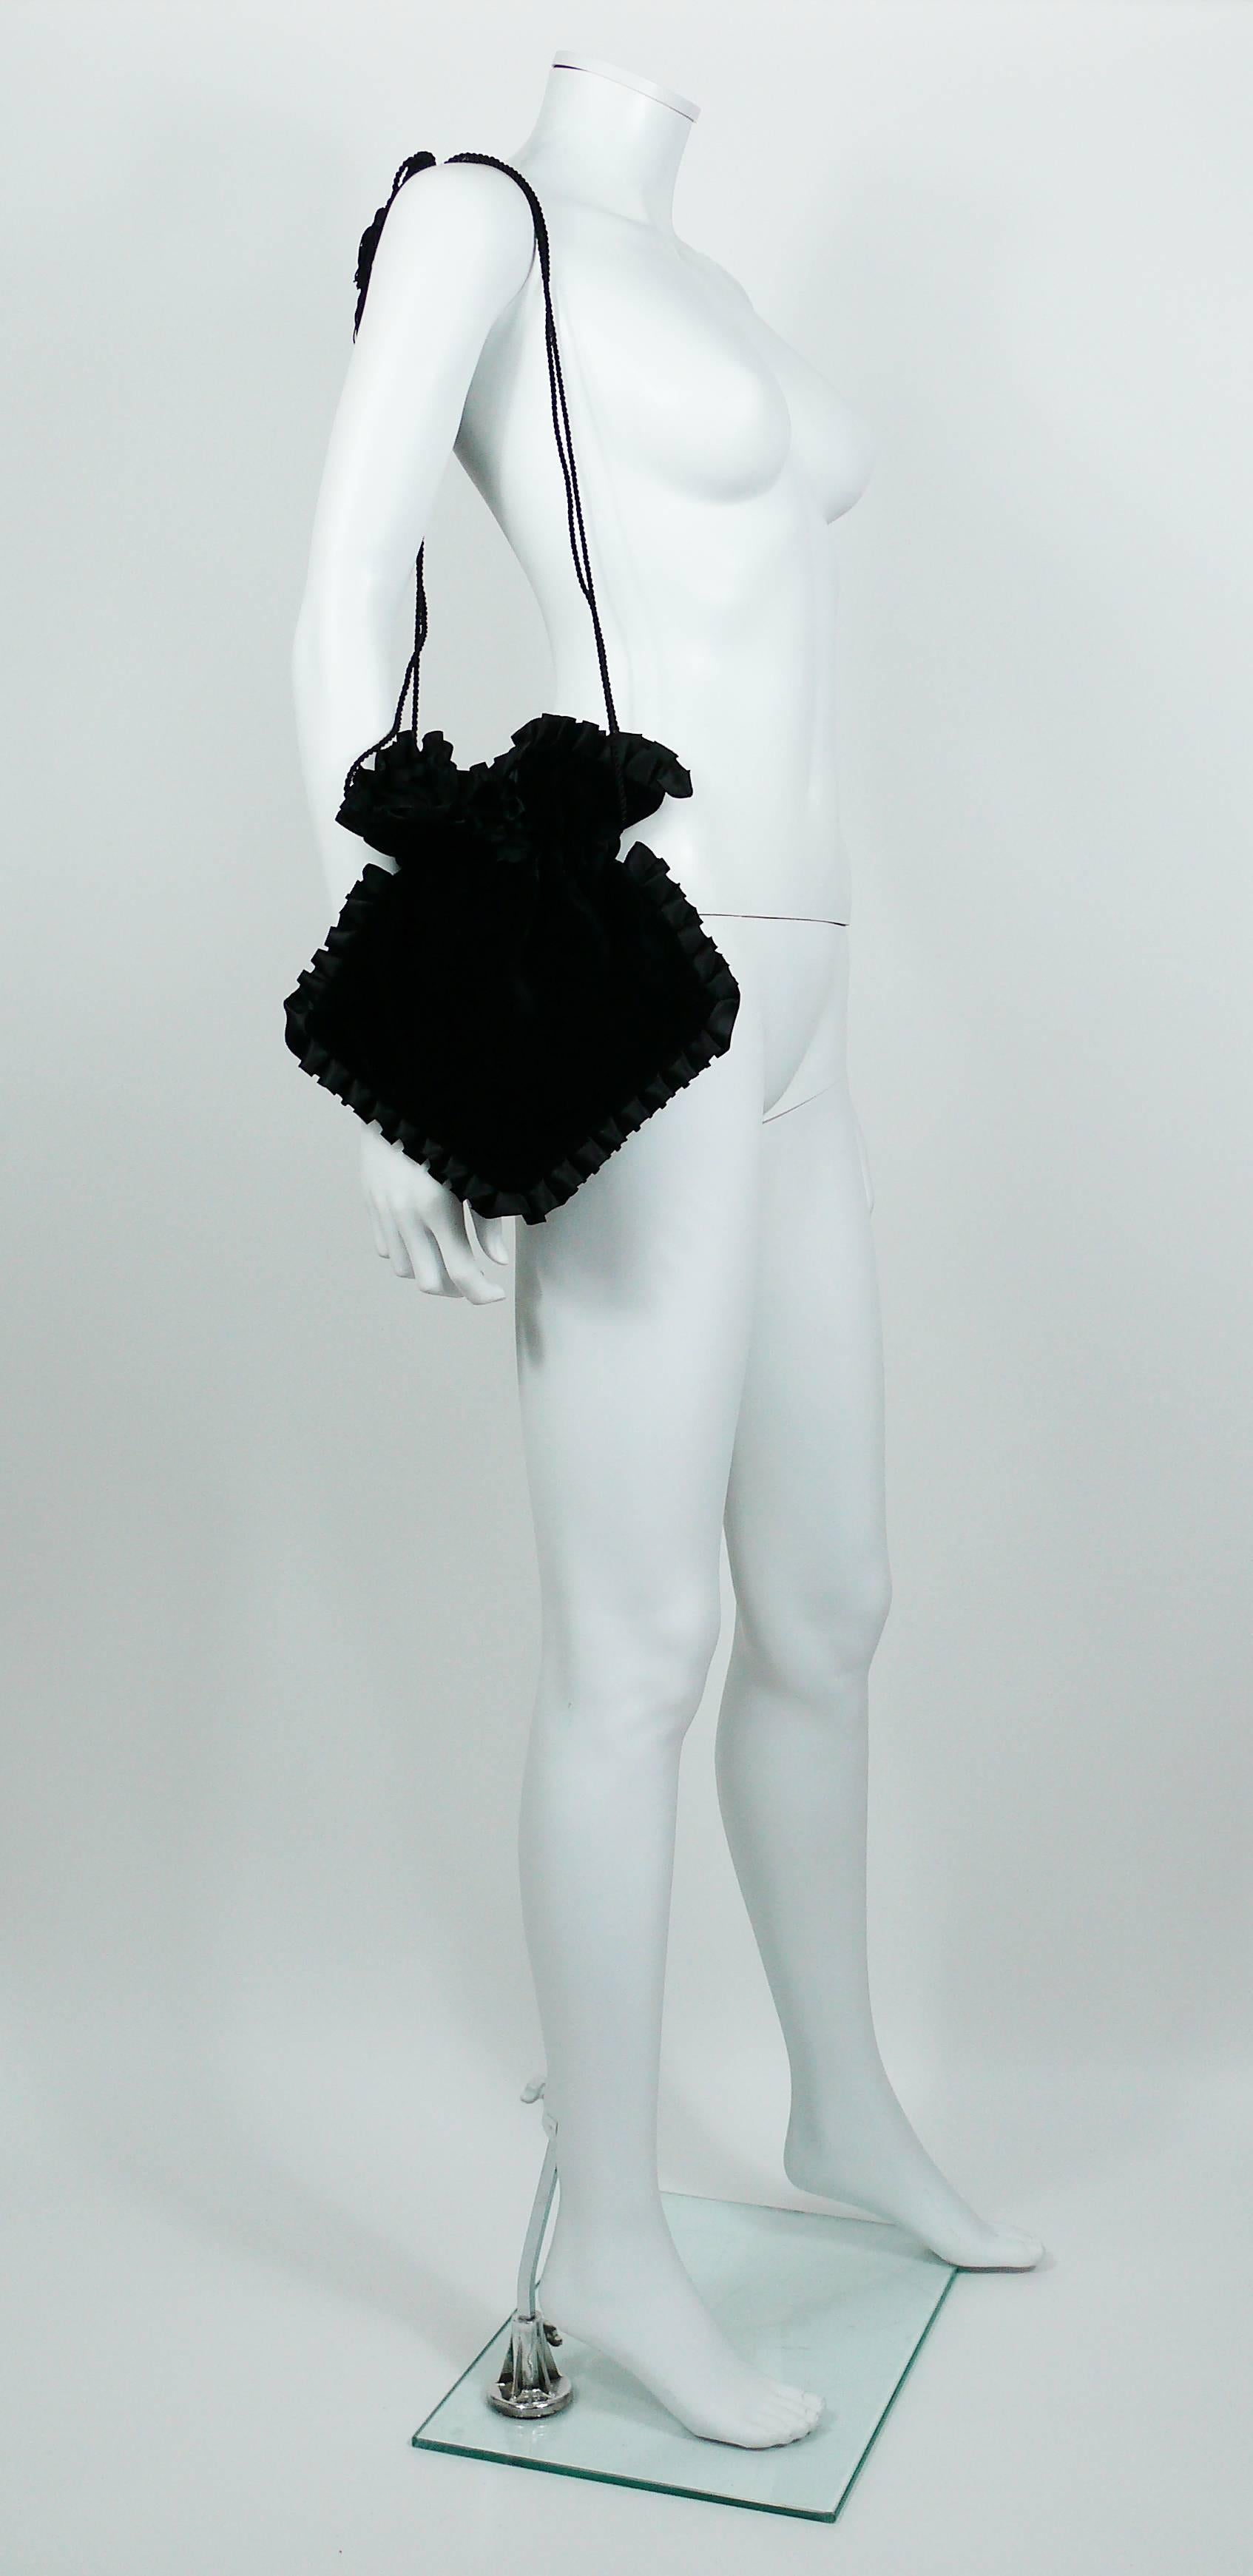 YVES SAINT LAURENT vintage black velvet evening bag featuring ruffled detail and passementerie strap with tassels.

Marked YVES SAINT LAURENT.

Indicative measurements : length (incl. strap) approx. 59 cm (23.23 inches) / max. width (excl. ruffles)